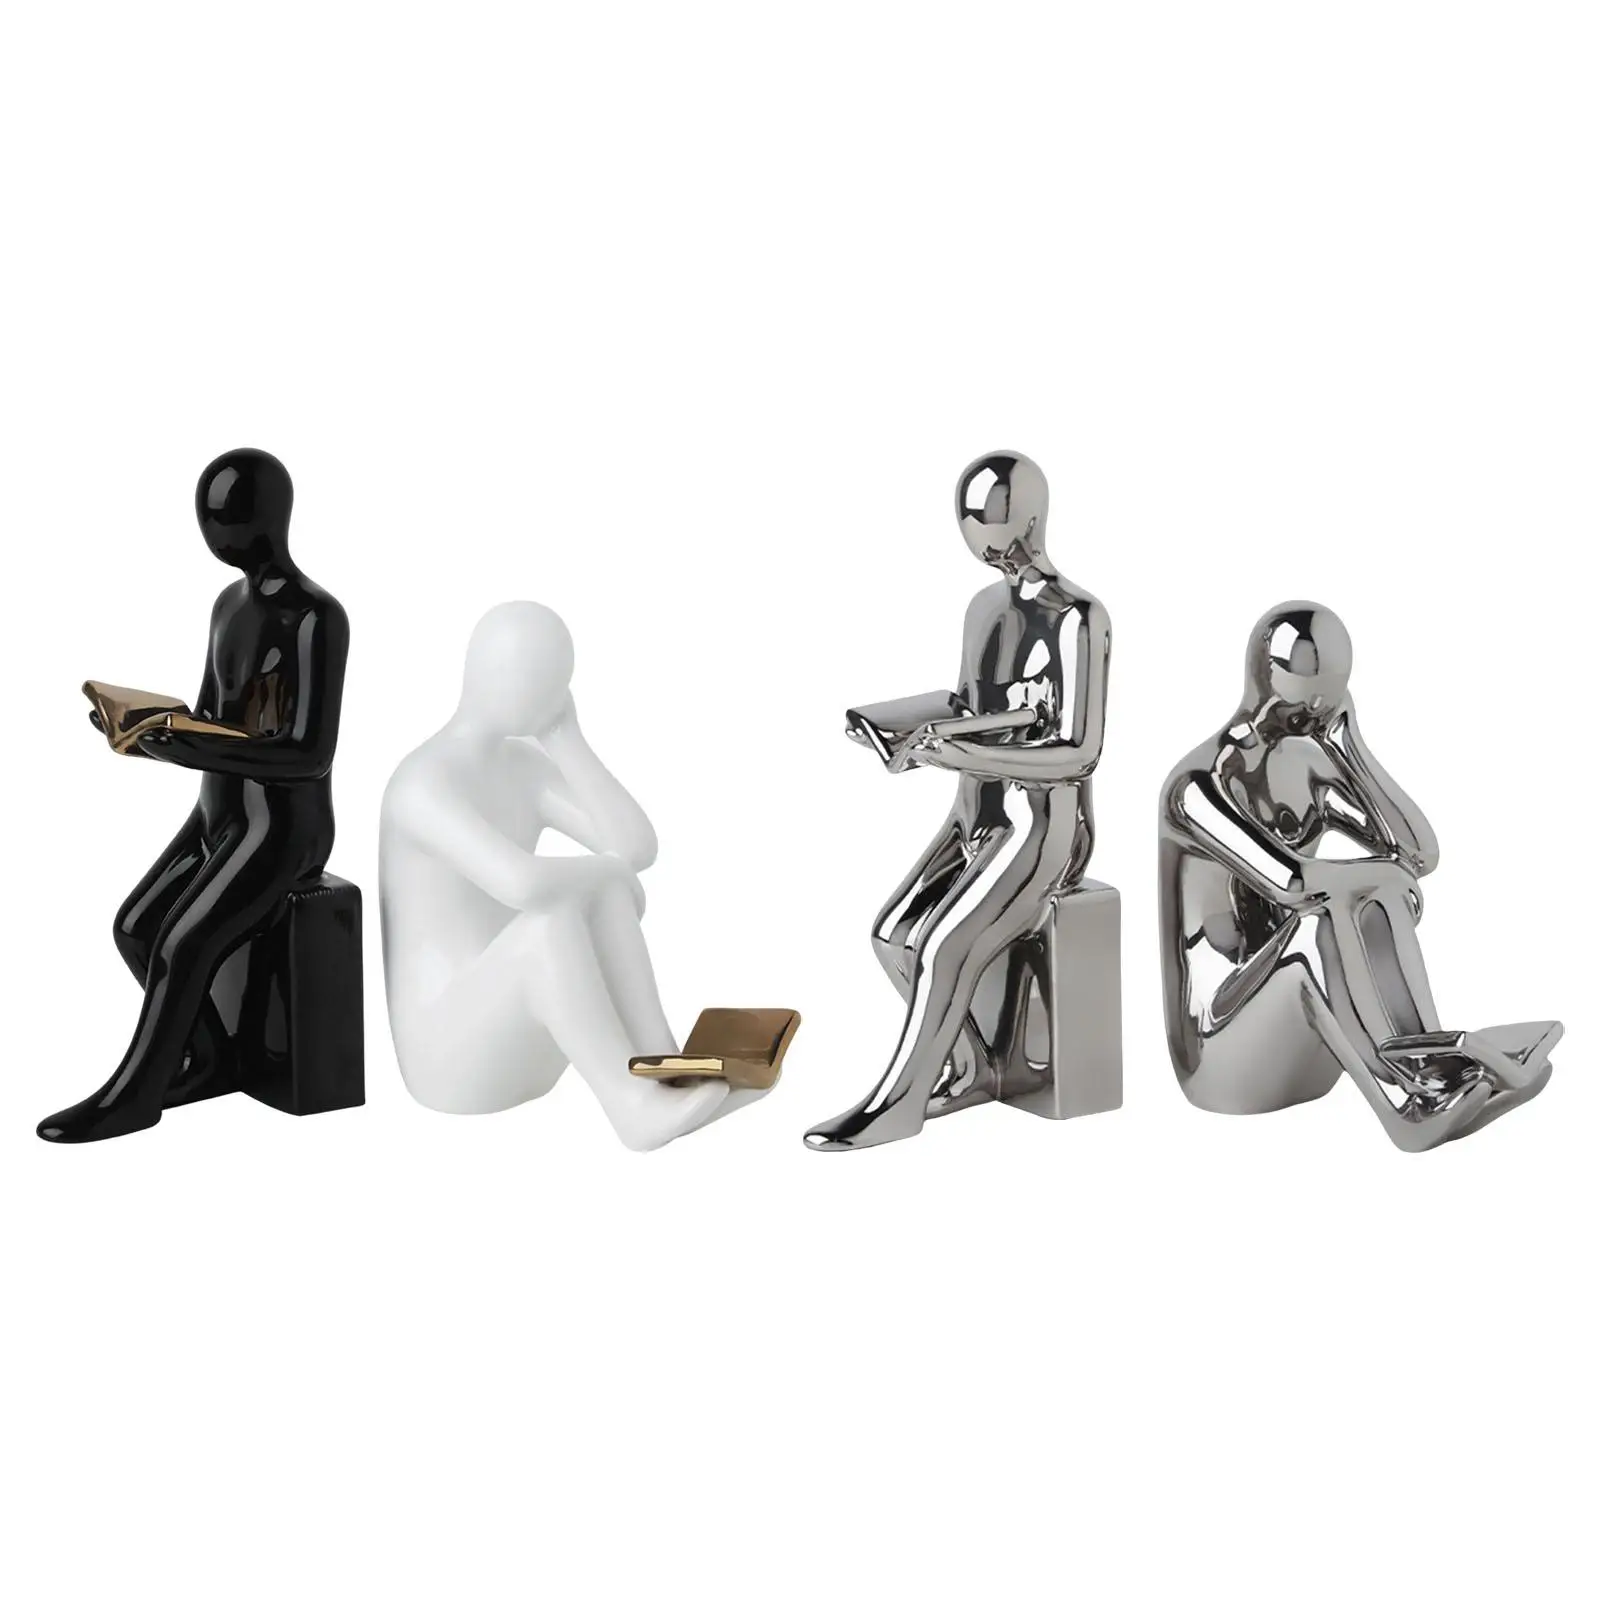 

Ceramic Human Statues Collectible Sculpture Abstract Figurines Gifts for Farmhouse Room Ornaments Bookshelf Housewarming